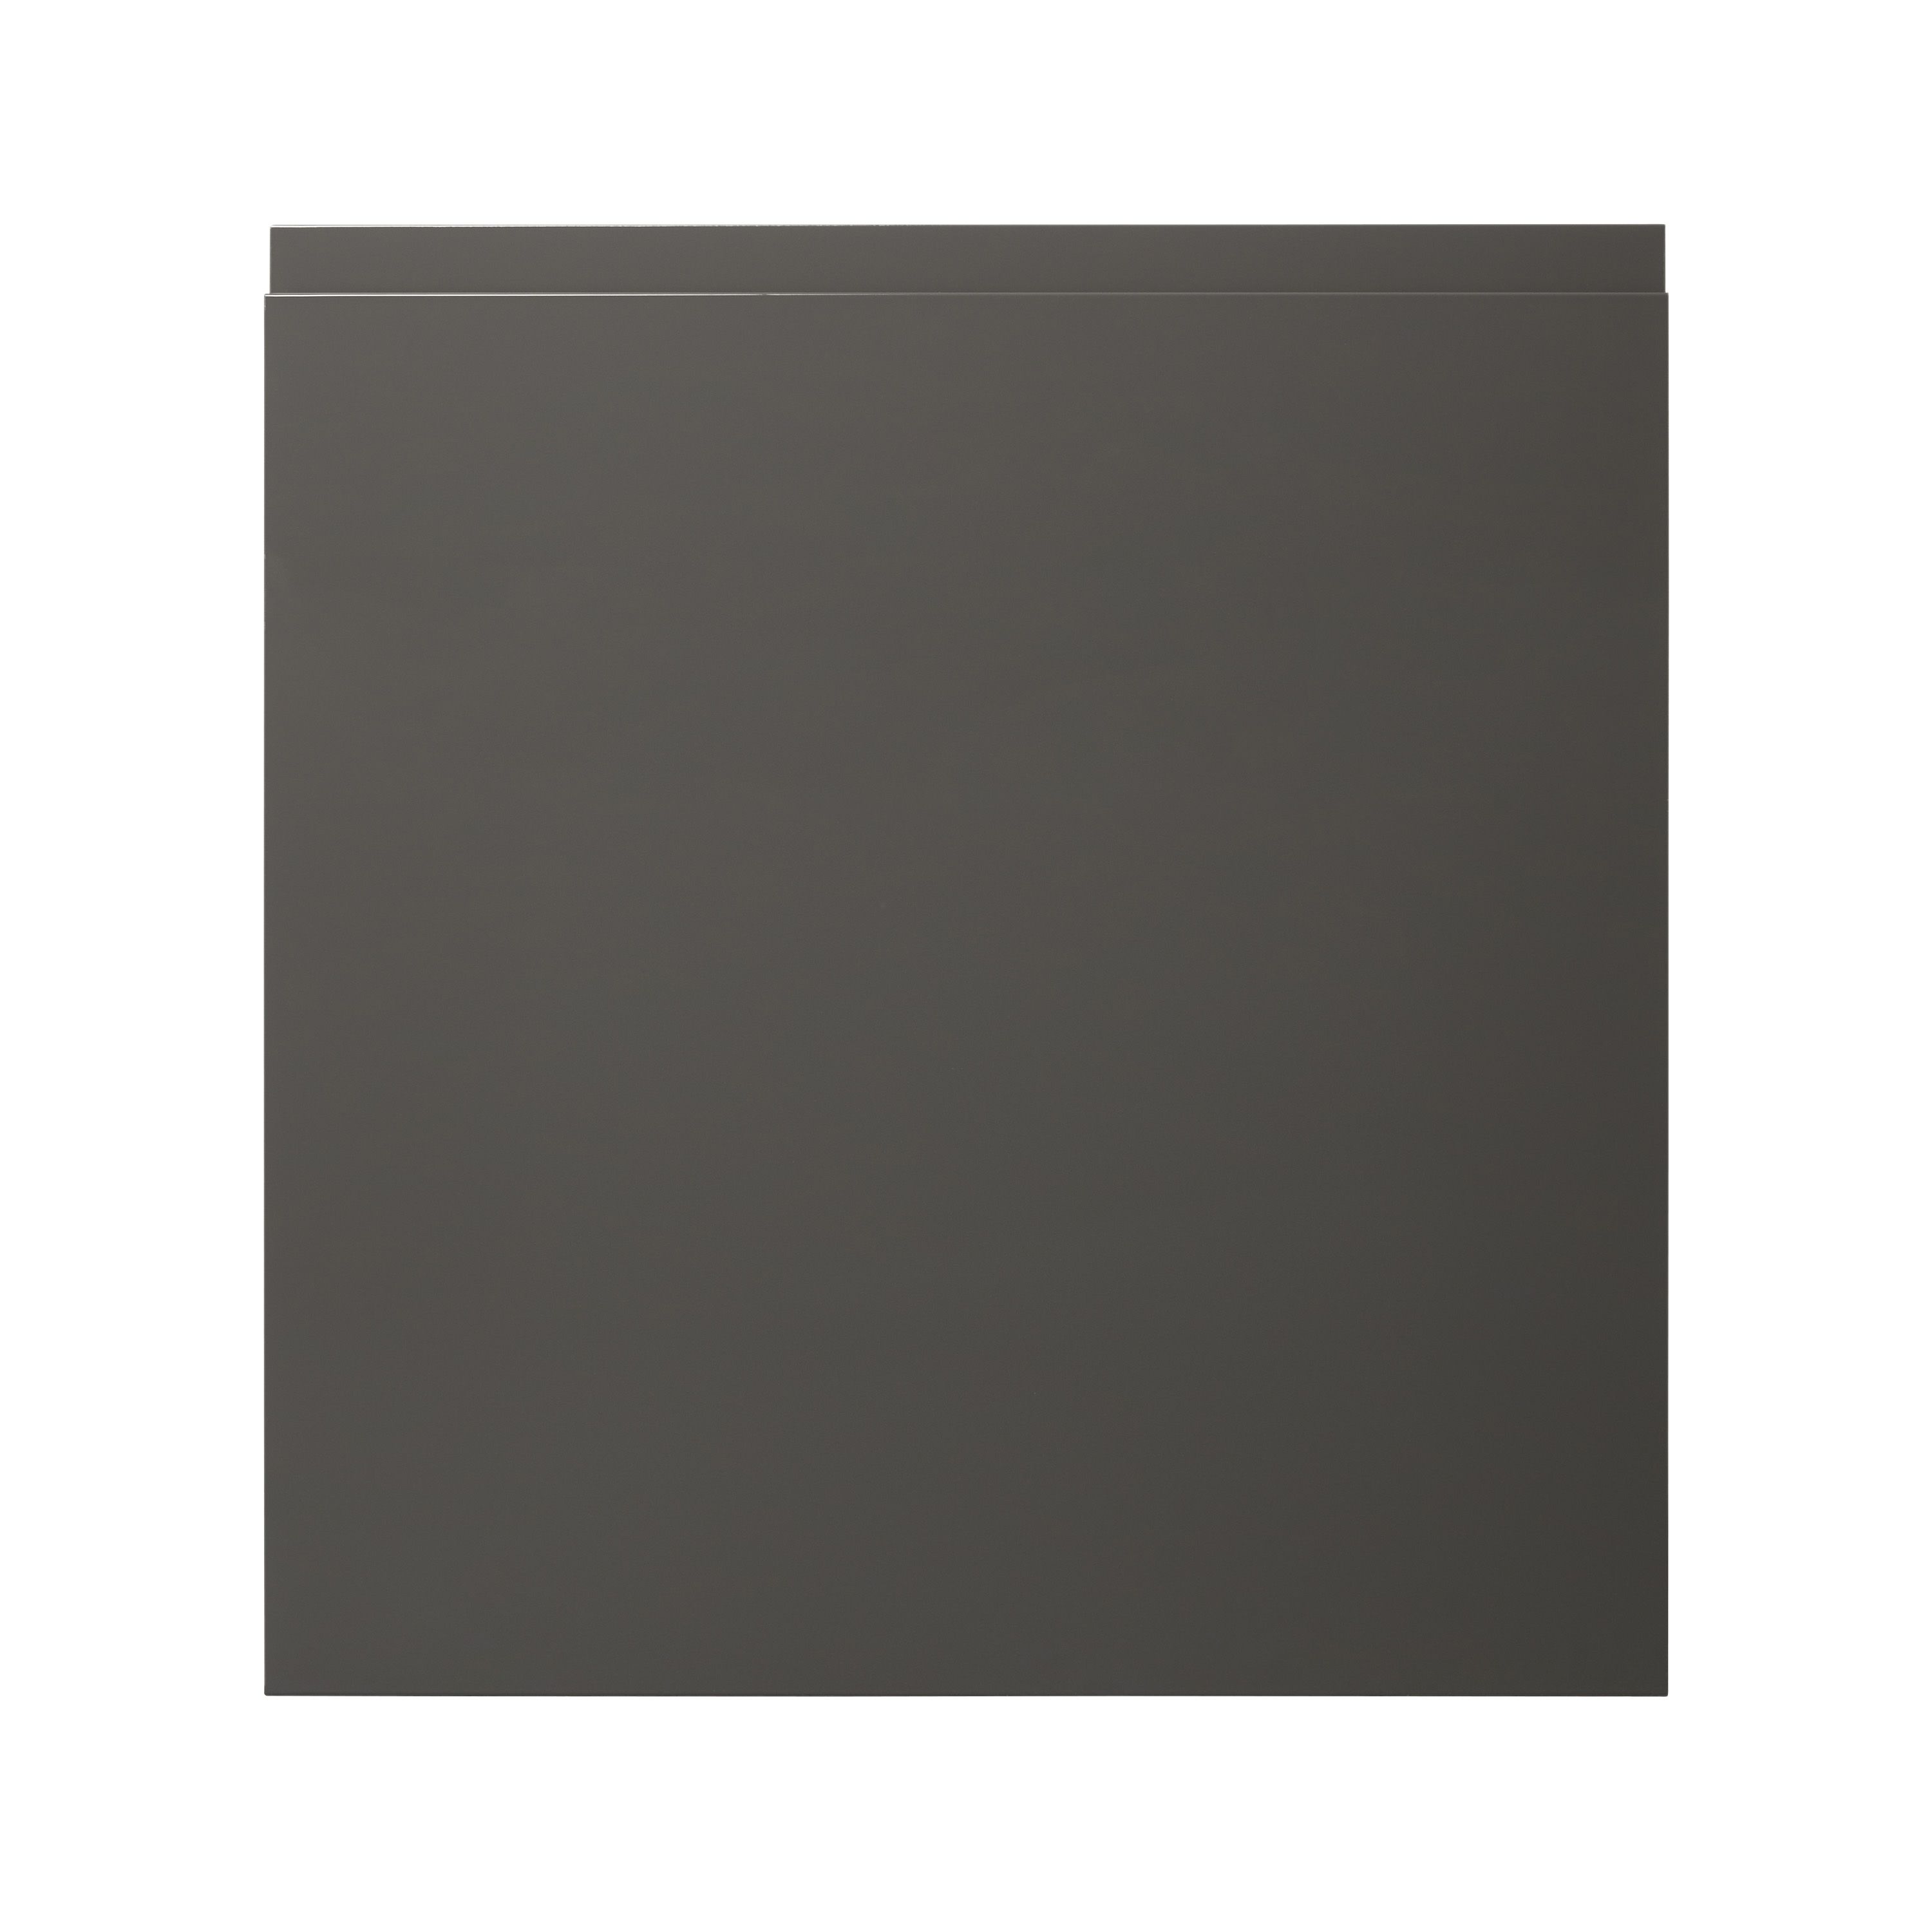 GoodHome Garcinia Gloss anthracite integrated handle Appliance Cabinet door (W)600mm (H)626mm (T)19mm